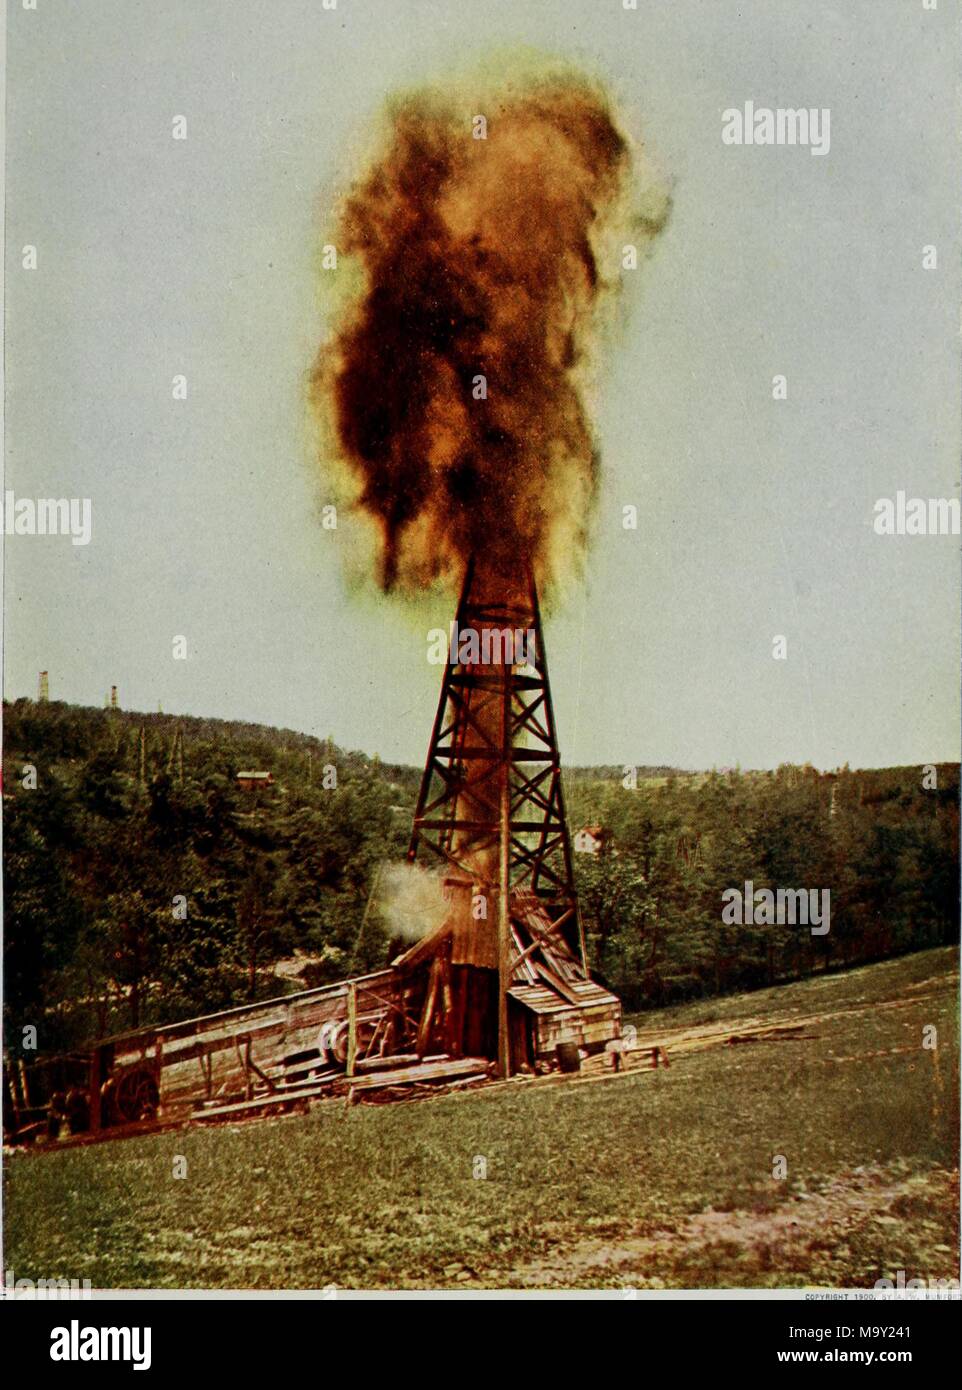 Color photograph depicting an oil well gushing or exploding above a wooden cabin-like structure, with a grassy rolling hill in the foreground, a pine forest, farm buildings, and other wells in the background, from the volume 'Nature neighbors, embracing birds, plants, animals, minerals, in natural colors by color photography' authored by Nathaniel Moore Banta, Albert Schneider, William Kerr Higley, and Gerard Alan Abbott, 1914. Courtesy Internet Archive. () Stock Photo